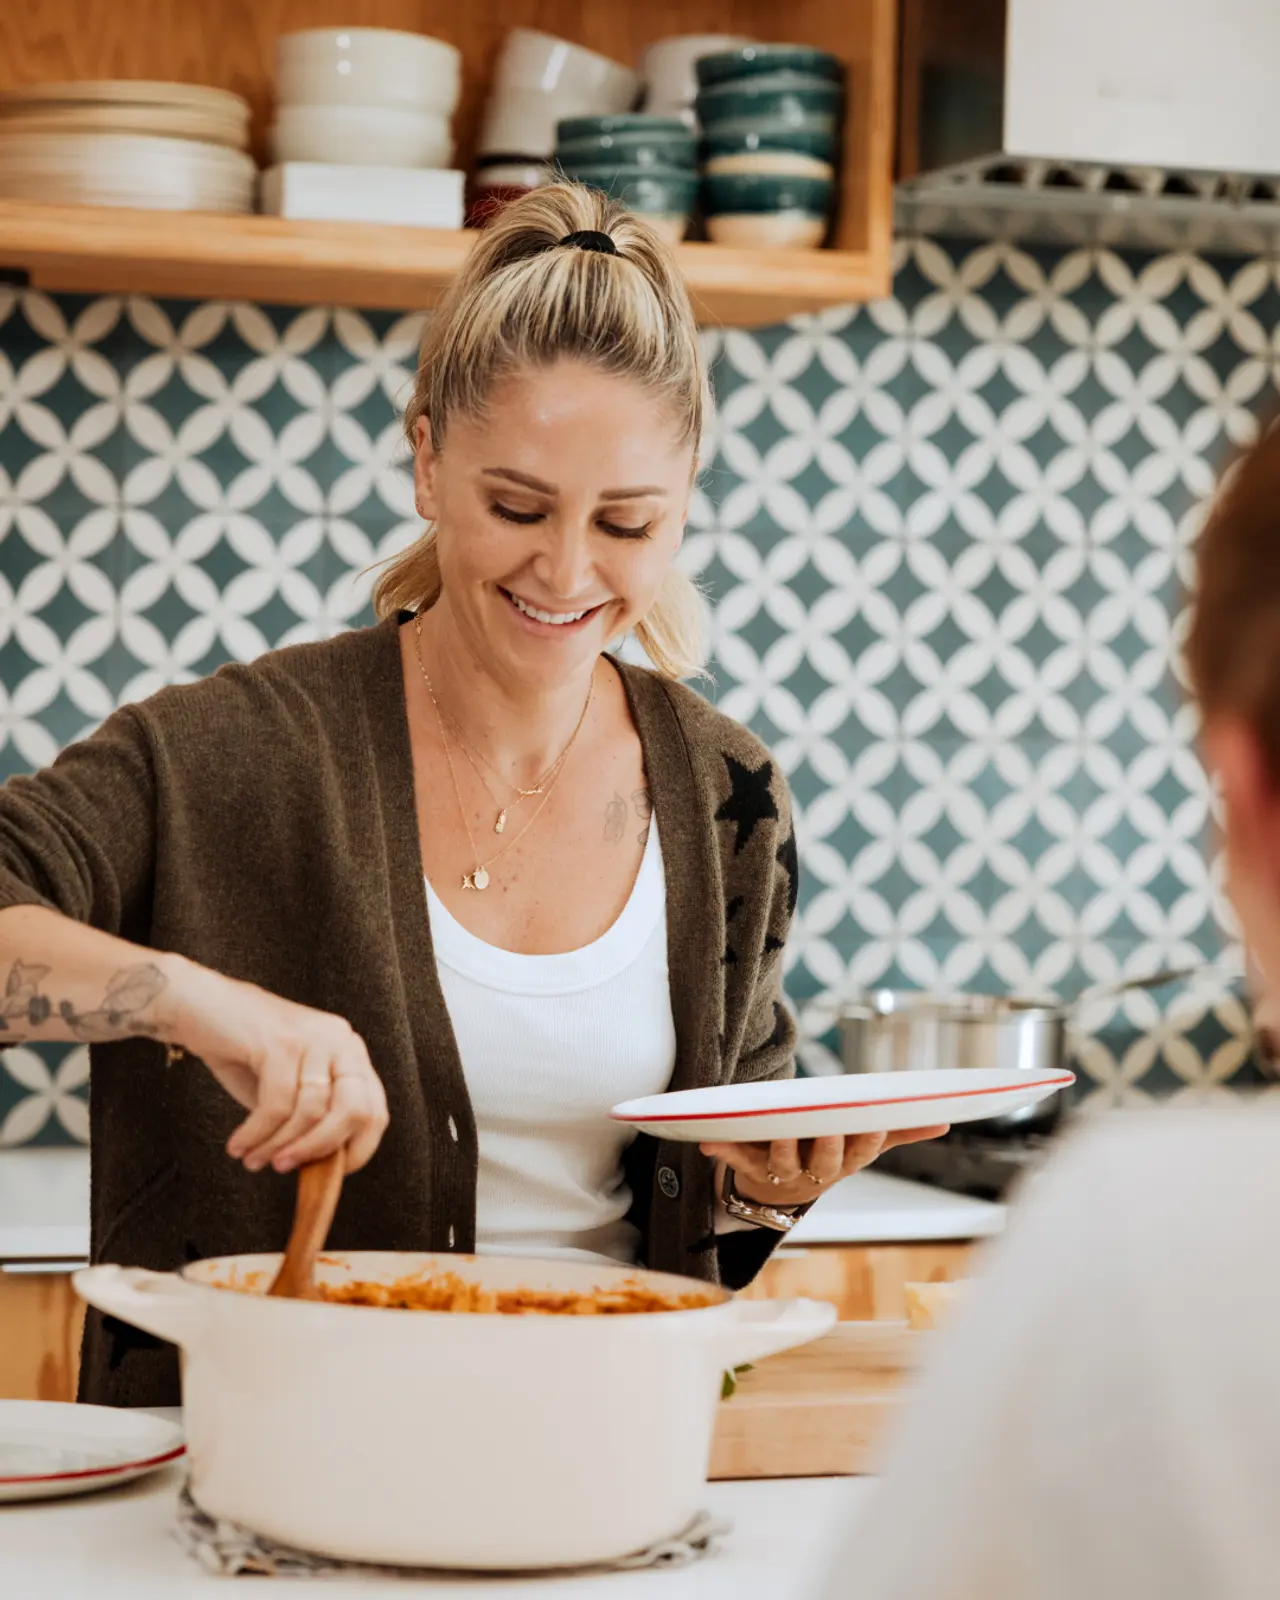 A smiling person is stirring a pot of food while another individual waits with an empty plate.